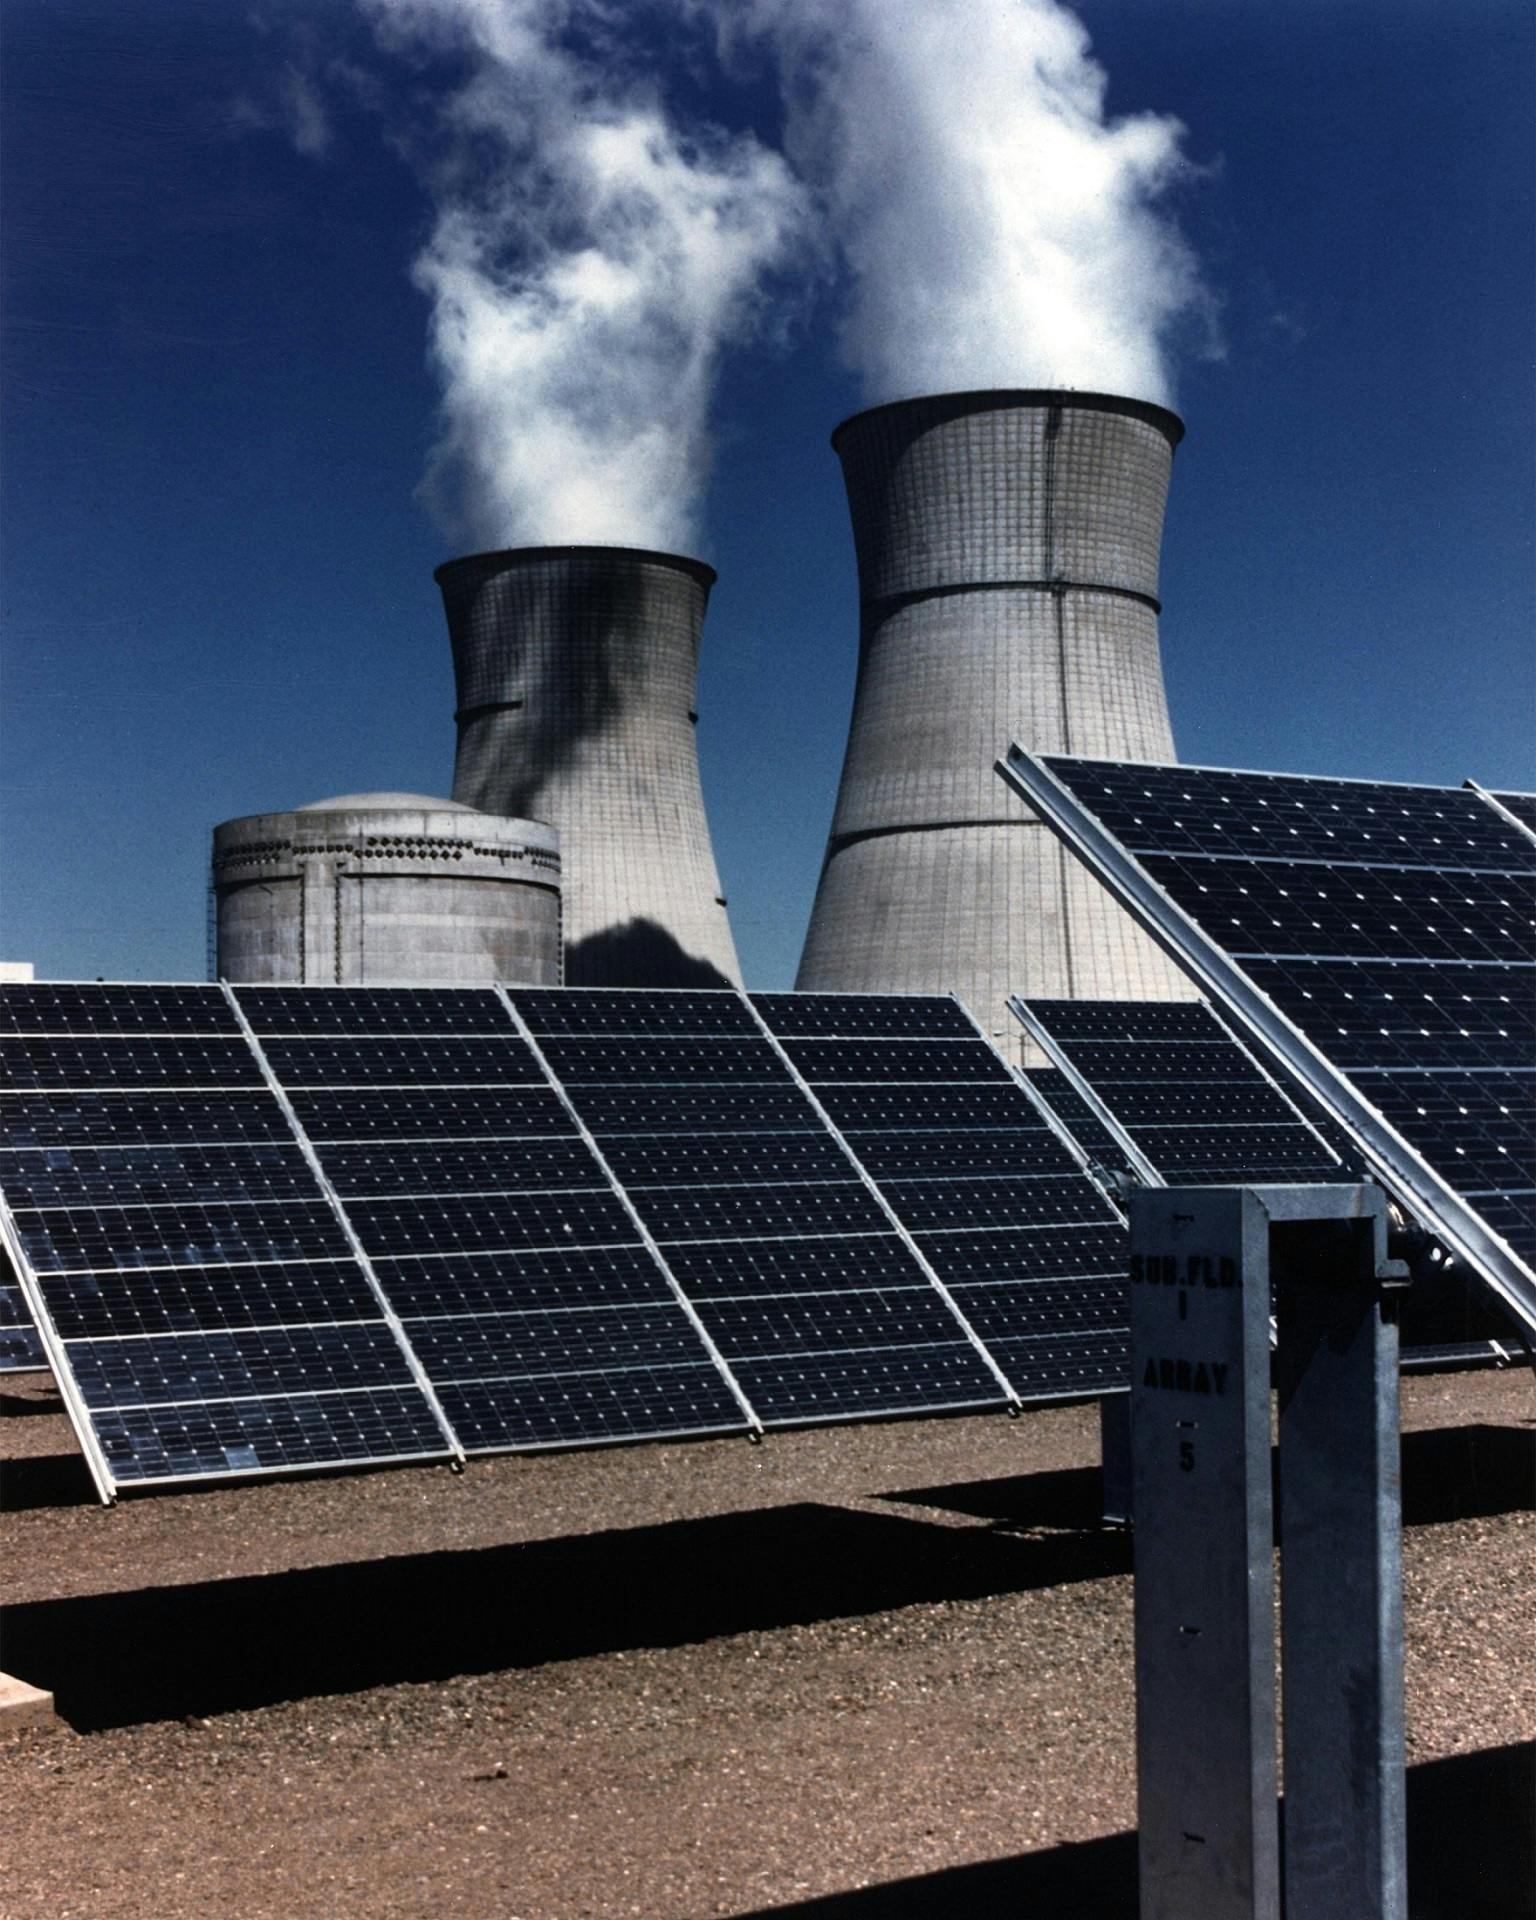 a group of solar panels sitting on top of a dirt field, a colorized photo, pexels contest winner, nuclear art, power plants with smoke, promo image, on a dark background, taken in the late 2010s